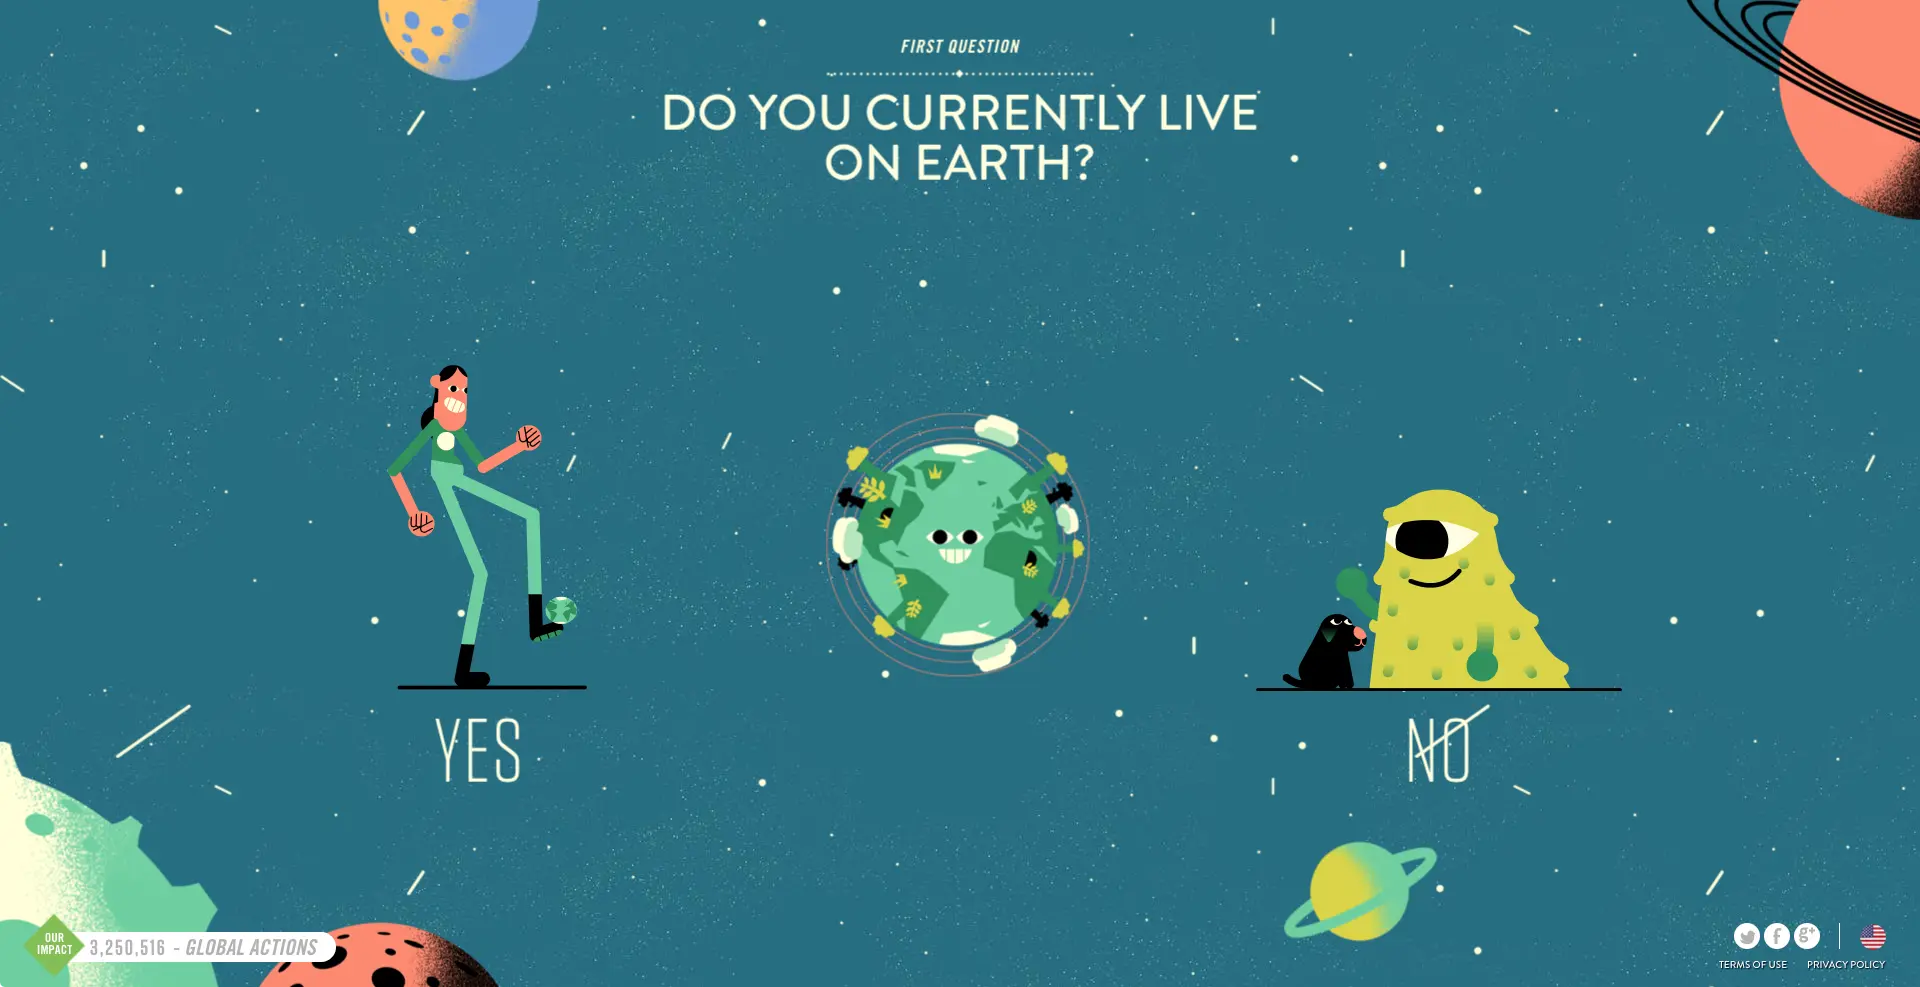 Do you currently live on Earth?